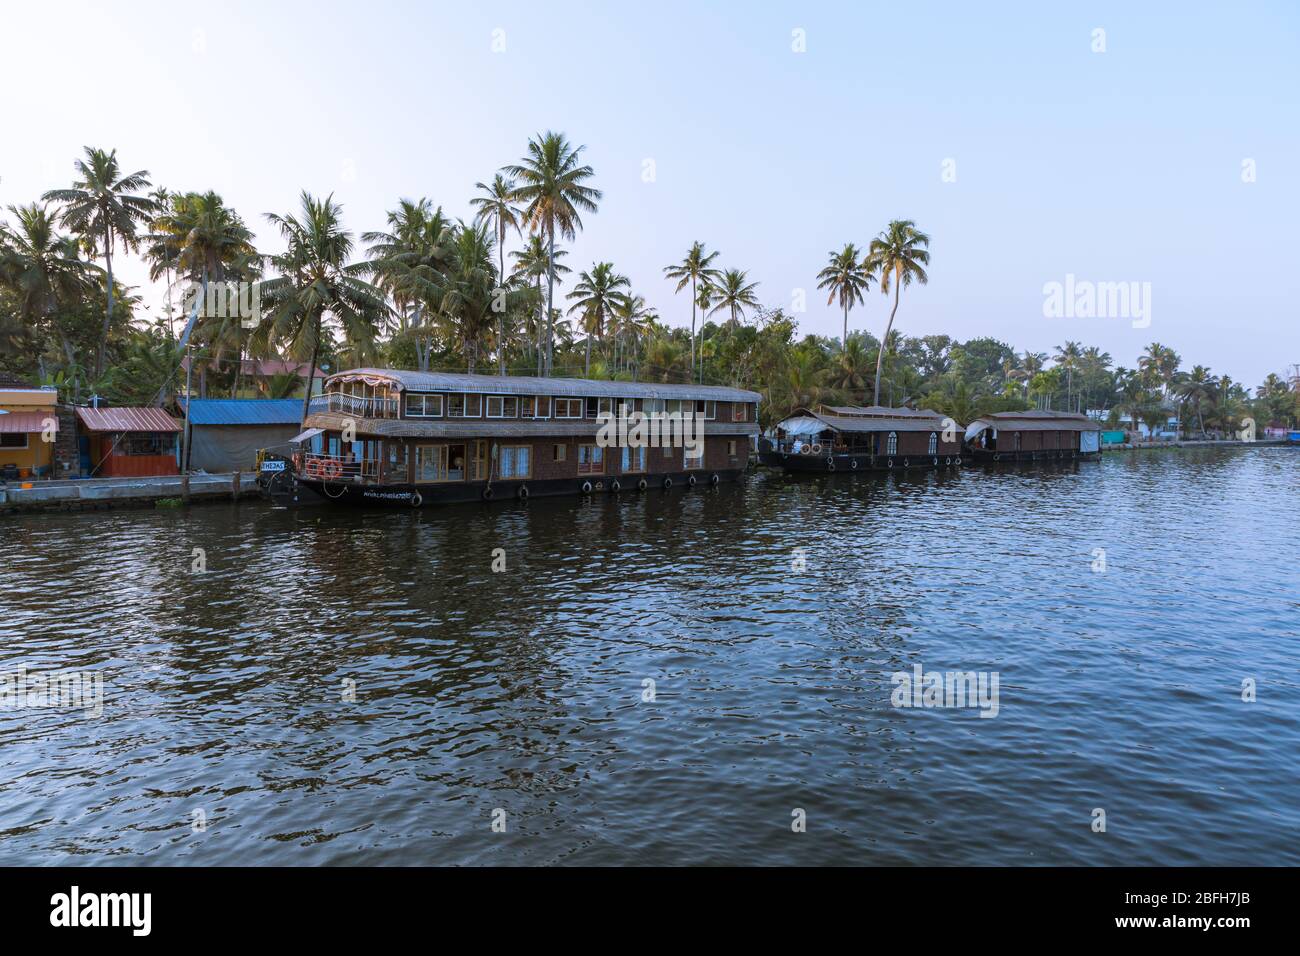 Alleppey, Kerala - January 6, 2019: house boats parked in alleppey backwaters kerala india Stock Photo